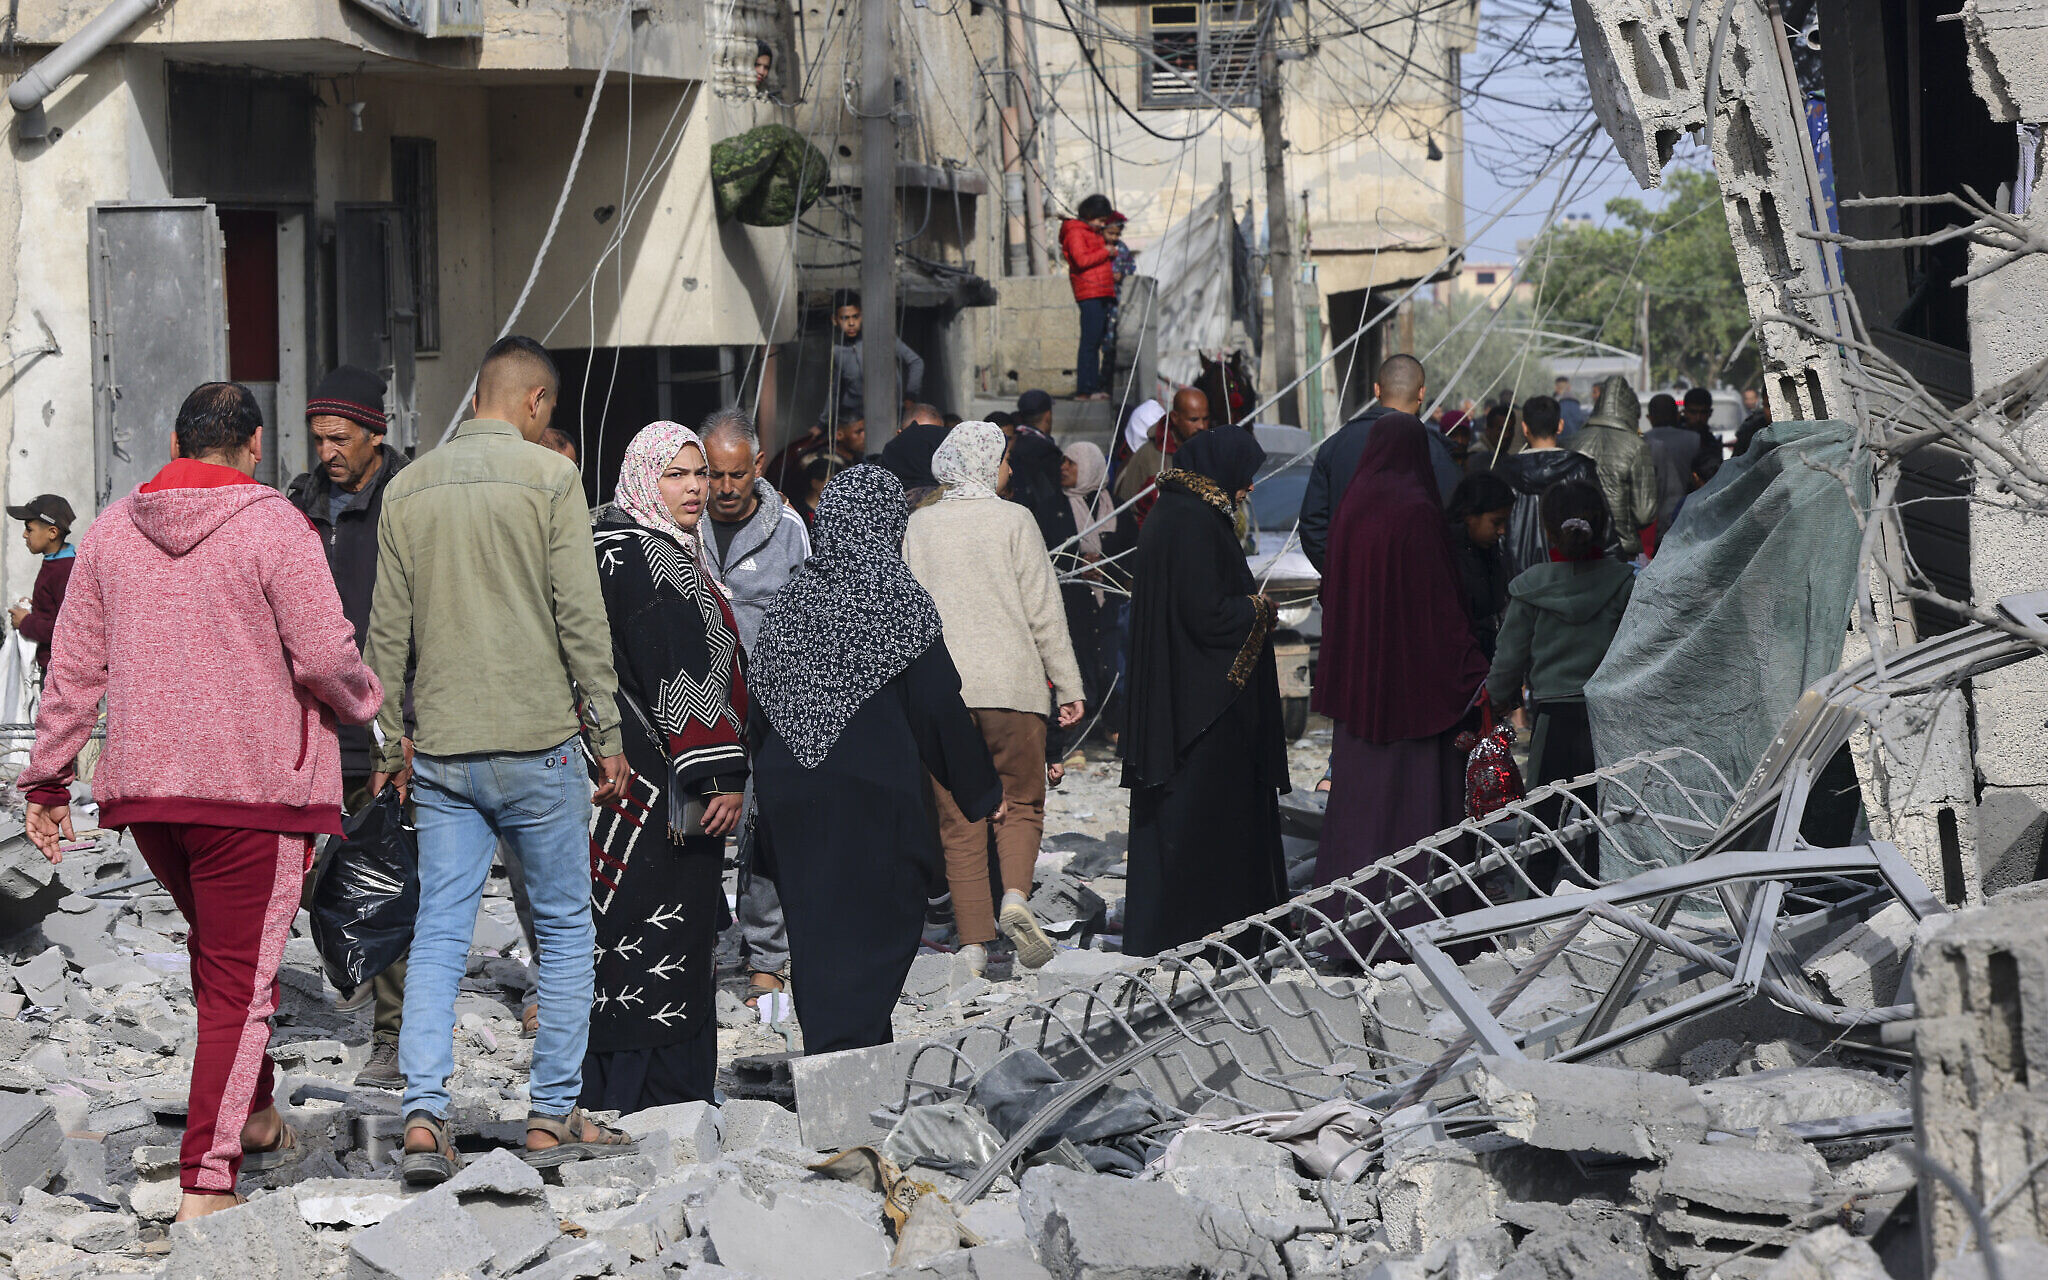 Concerns mount over civilian safety amidst potential offensive actions in Rafah (Credits: AFP)